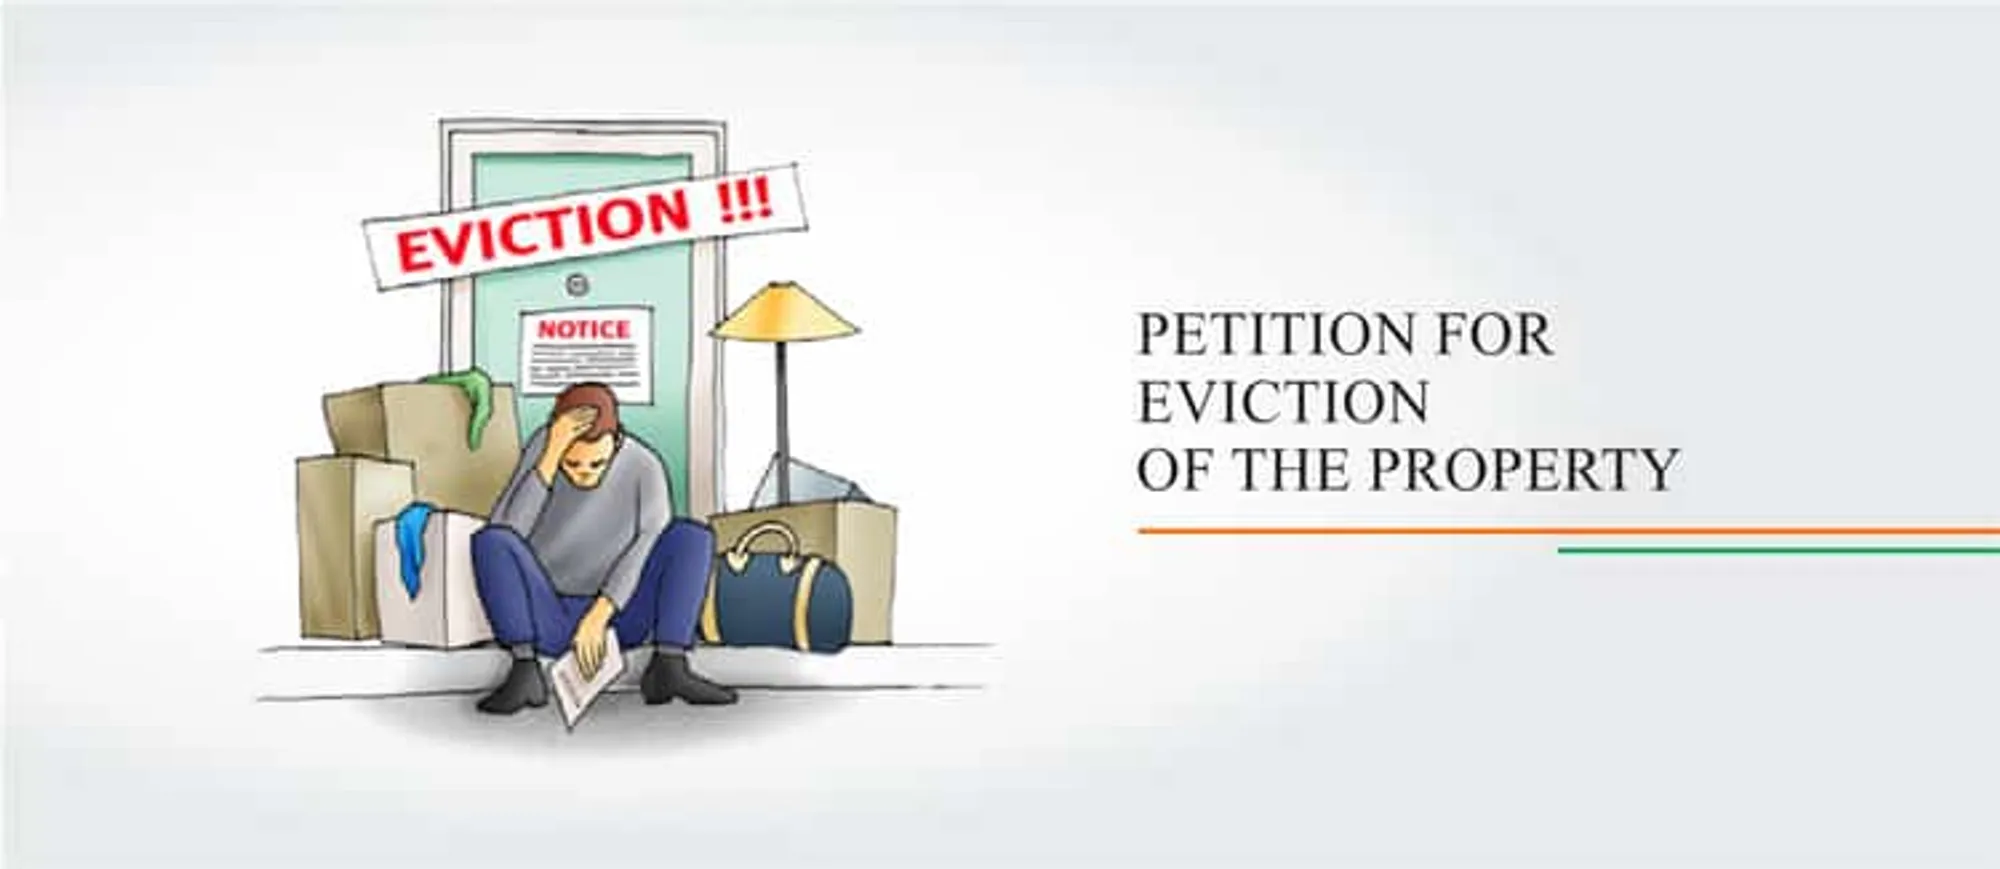 Petition for Eviction of the Property